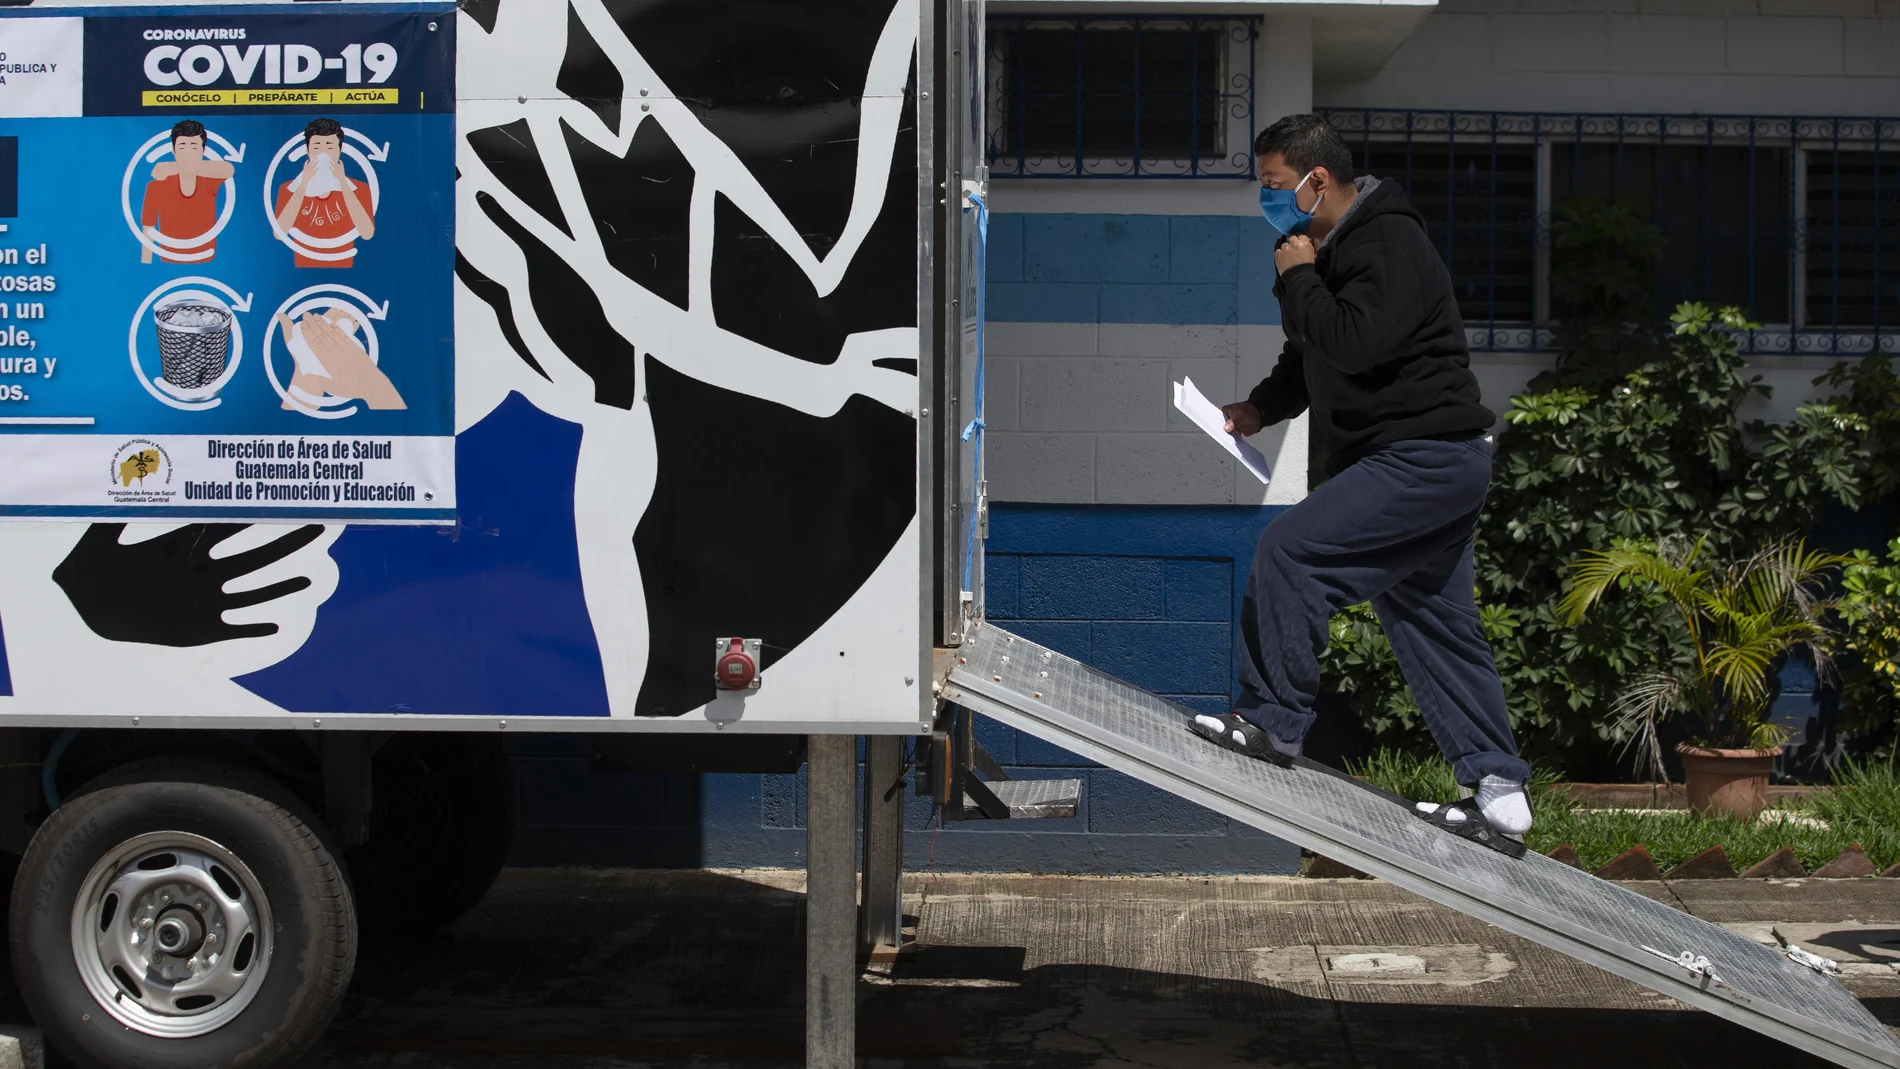 A deportee enters a mobile health clinic at the Immigration Institute shelter where Guatemalans deported from the U.S. are being held in quarantine, during a press tour in Guatemala City, Tuesday, July 7, 2020. According to the institute, more than 3,000 Guatemalans have been deported from the United States and 134 have tested positive for COVID-19 since the onset of the coronavirus emergency. (AP Photo/Moises Castillo)